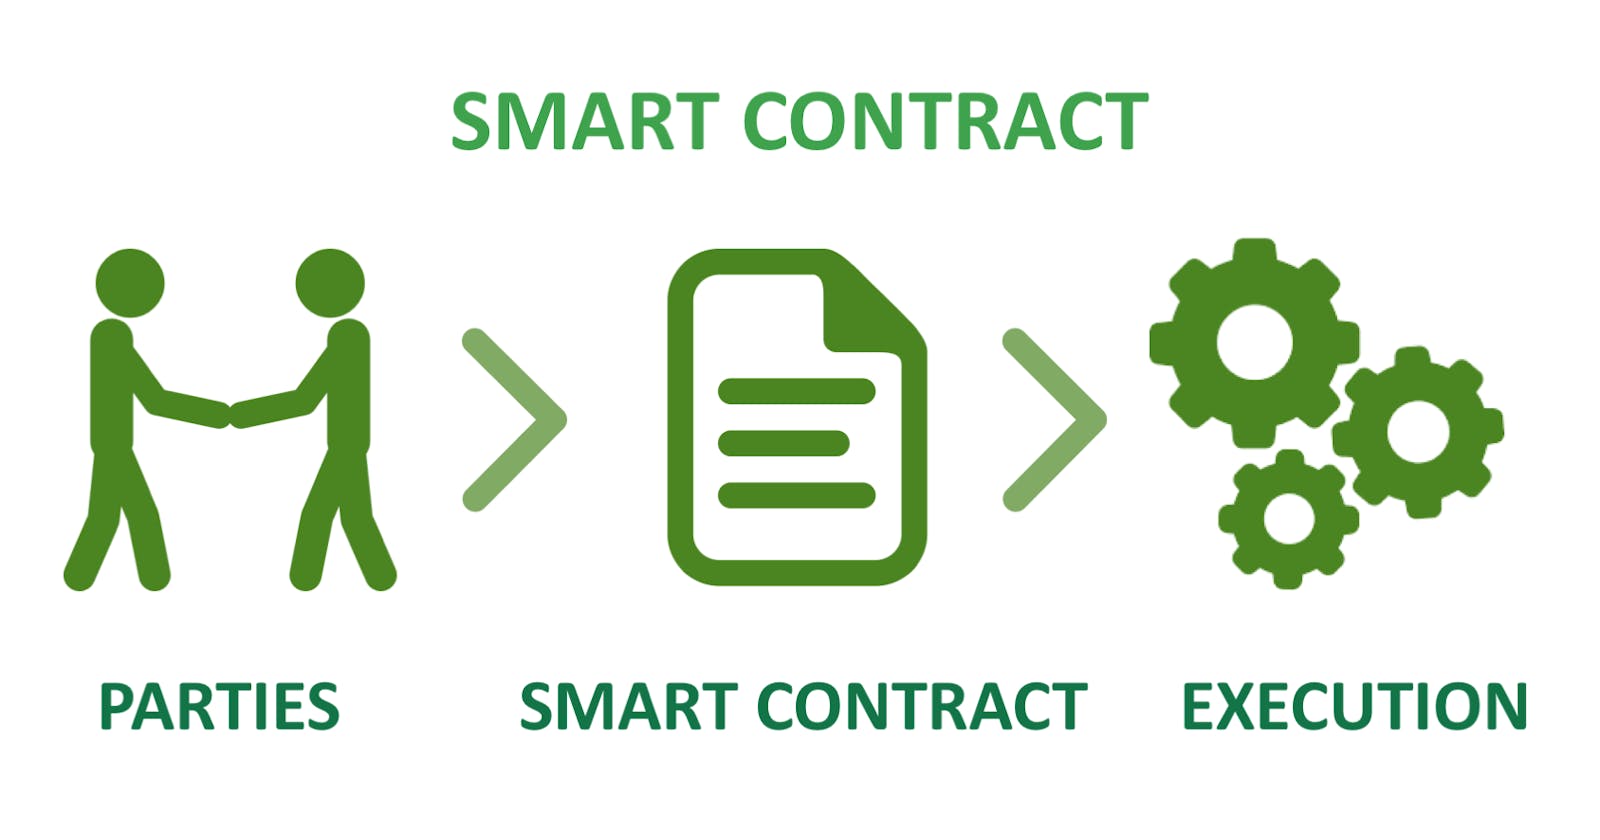 "Smart Contracts" the immutable code